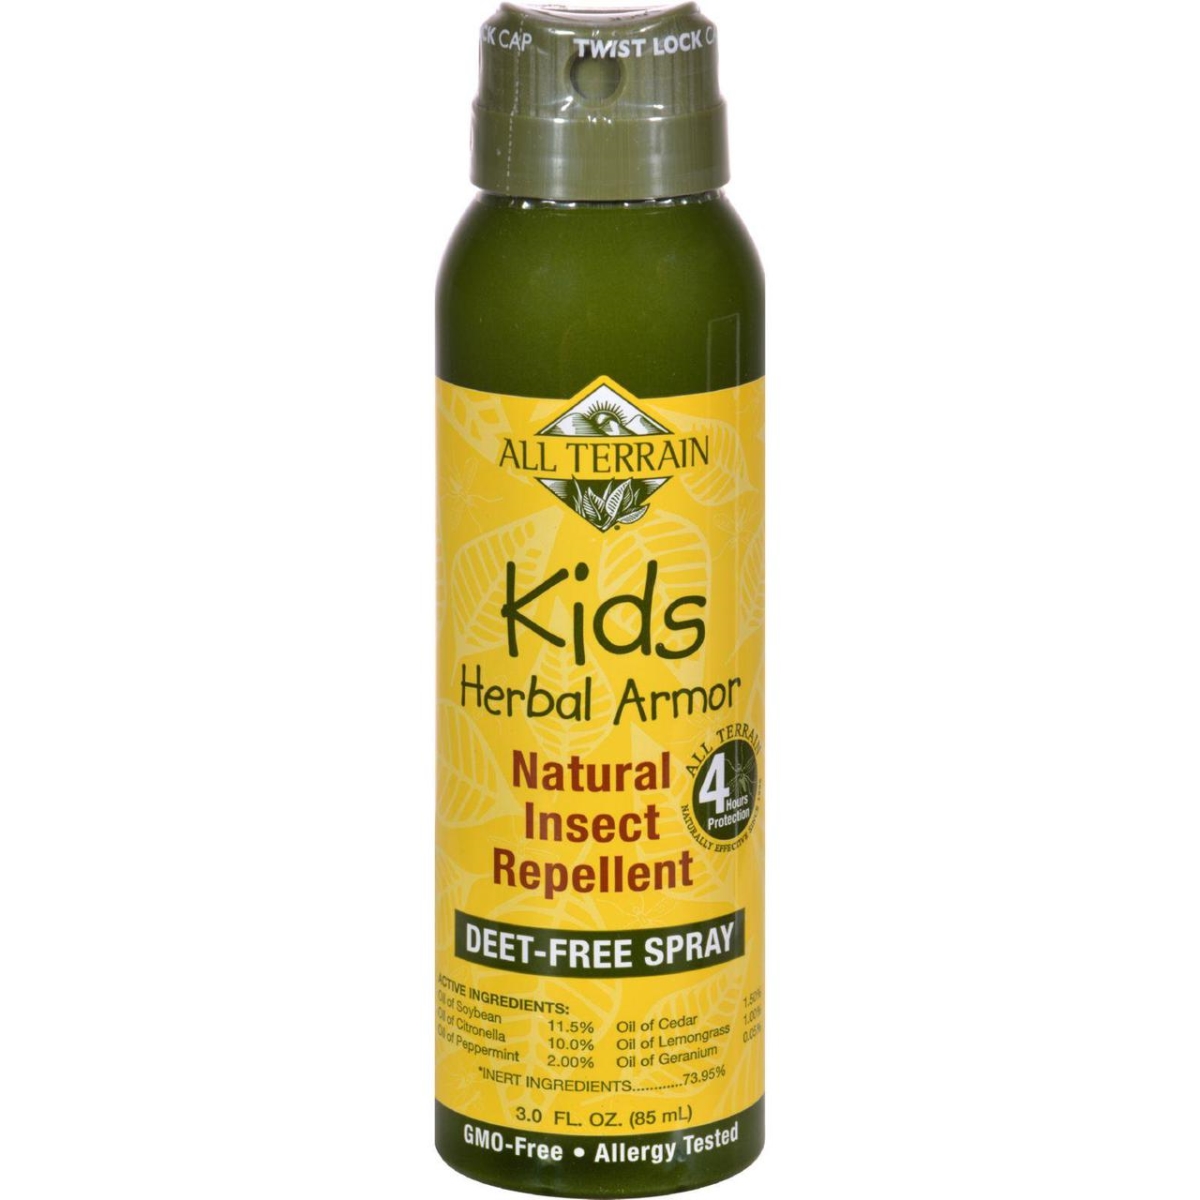 Hg1525260 3 Oz Herbal Armor Natural Insect Repellent Kids Continuous Spray